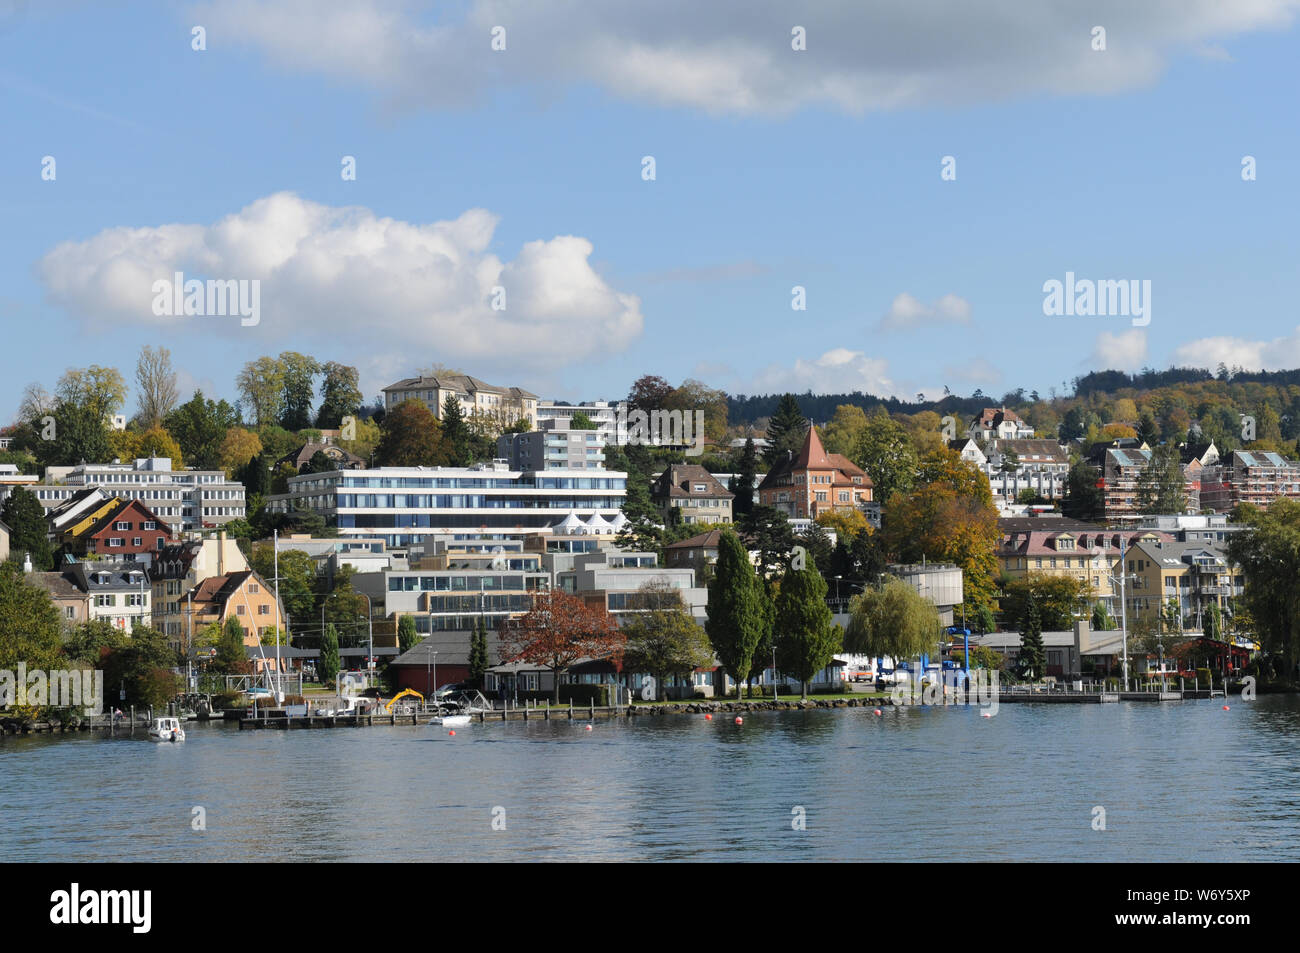 Switzerland: The sea police in Zürich Seefeld and the Epilepsy Clinic ion top of the hill Stock Photo